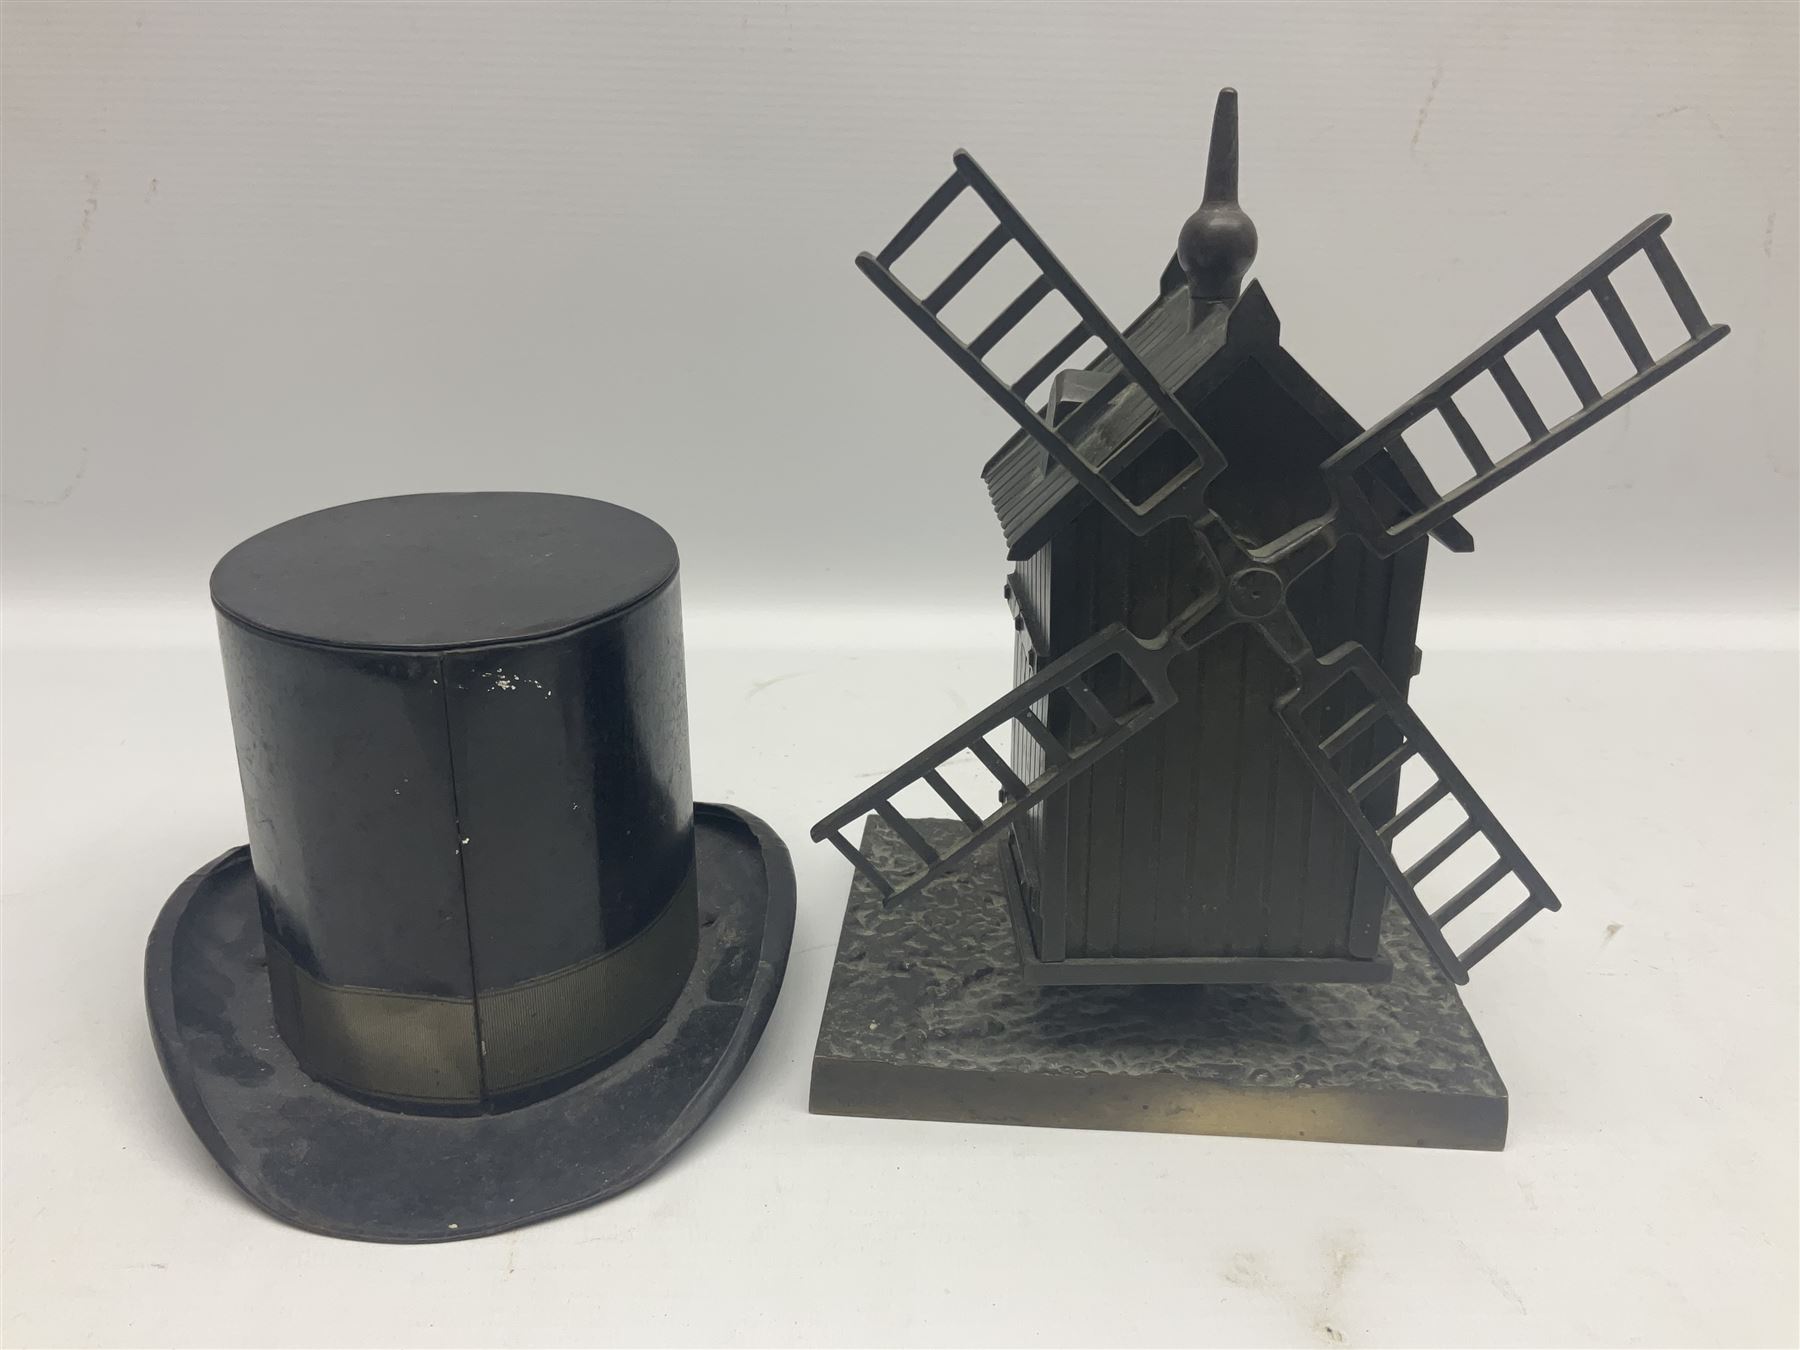 Early 20th century French bronze money bank in the form of a windmill with revolving sails - Image 6 of 7